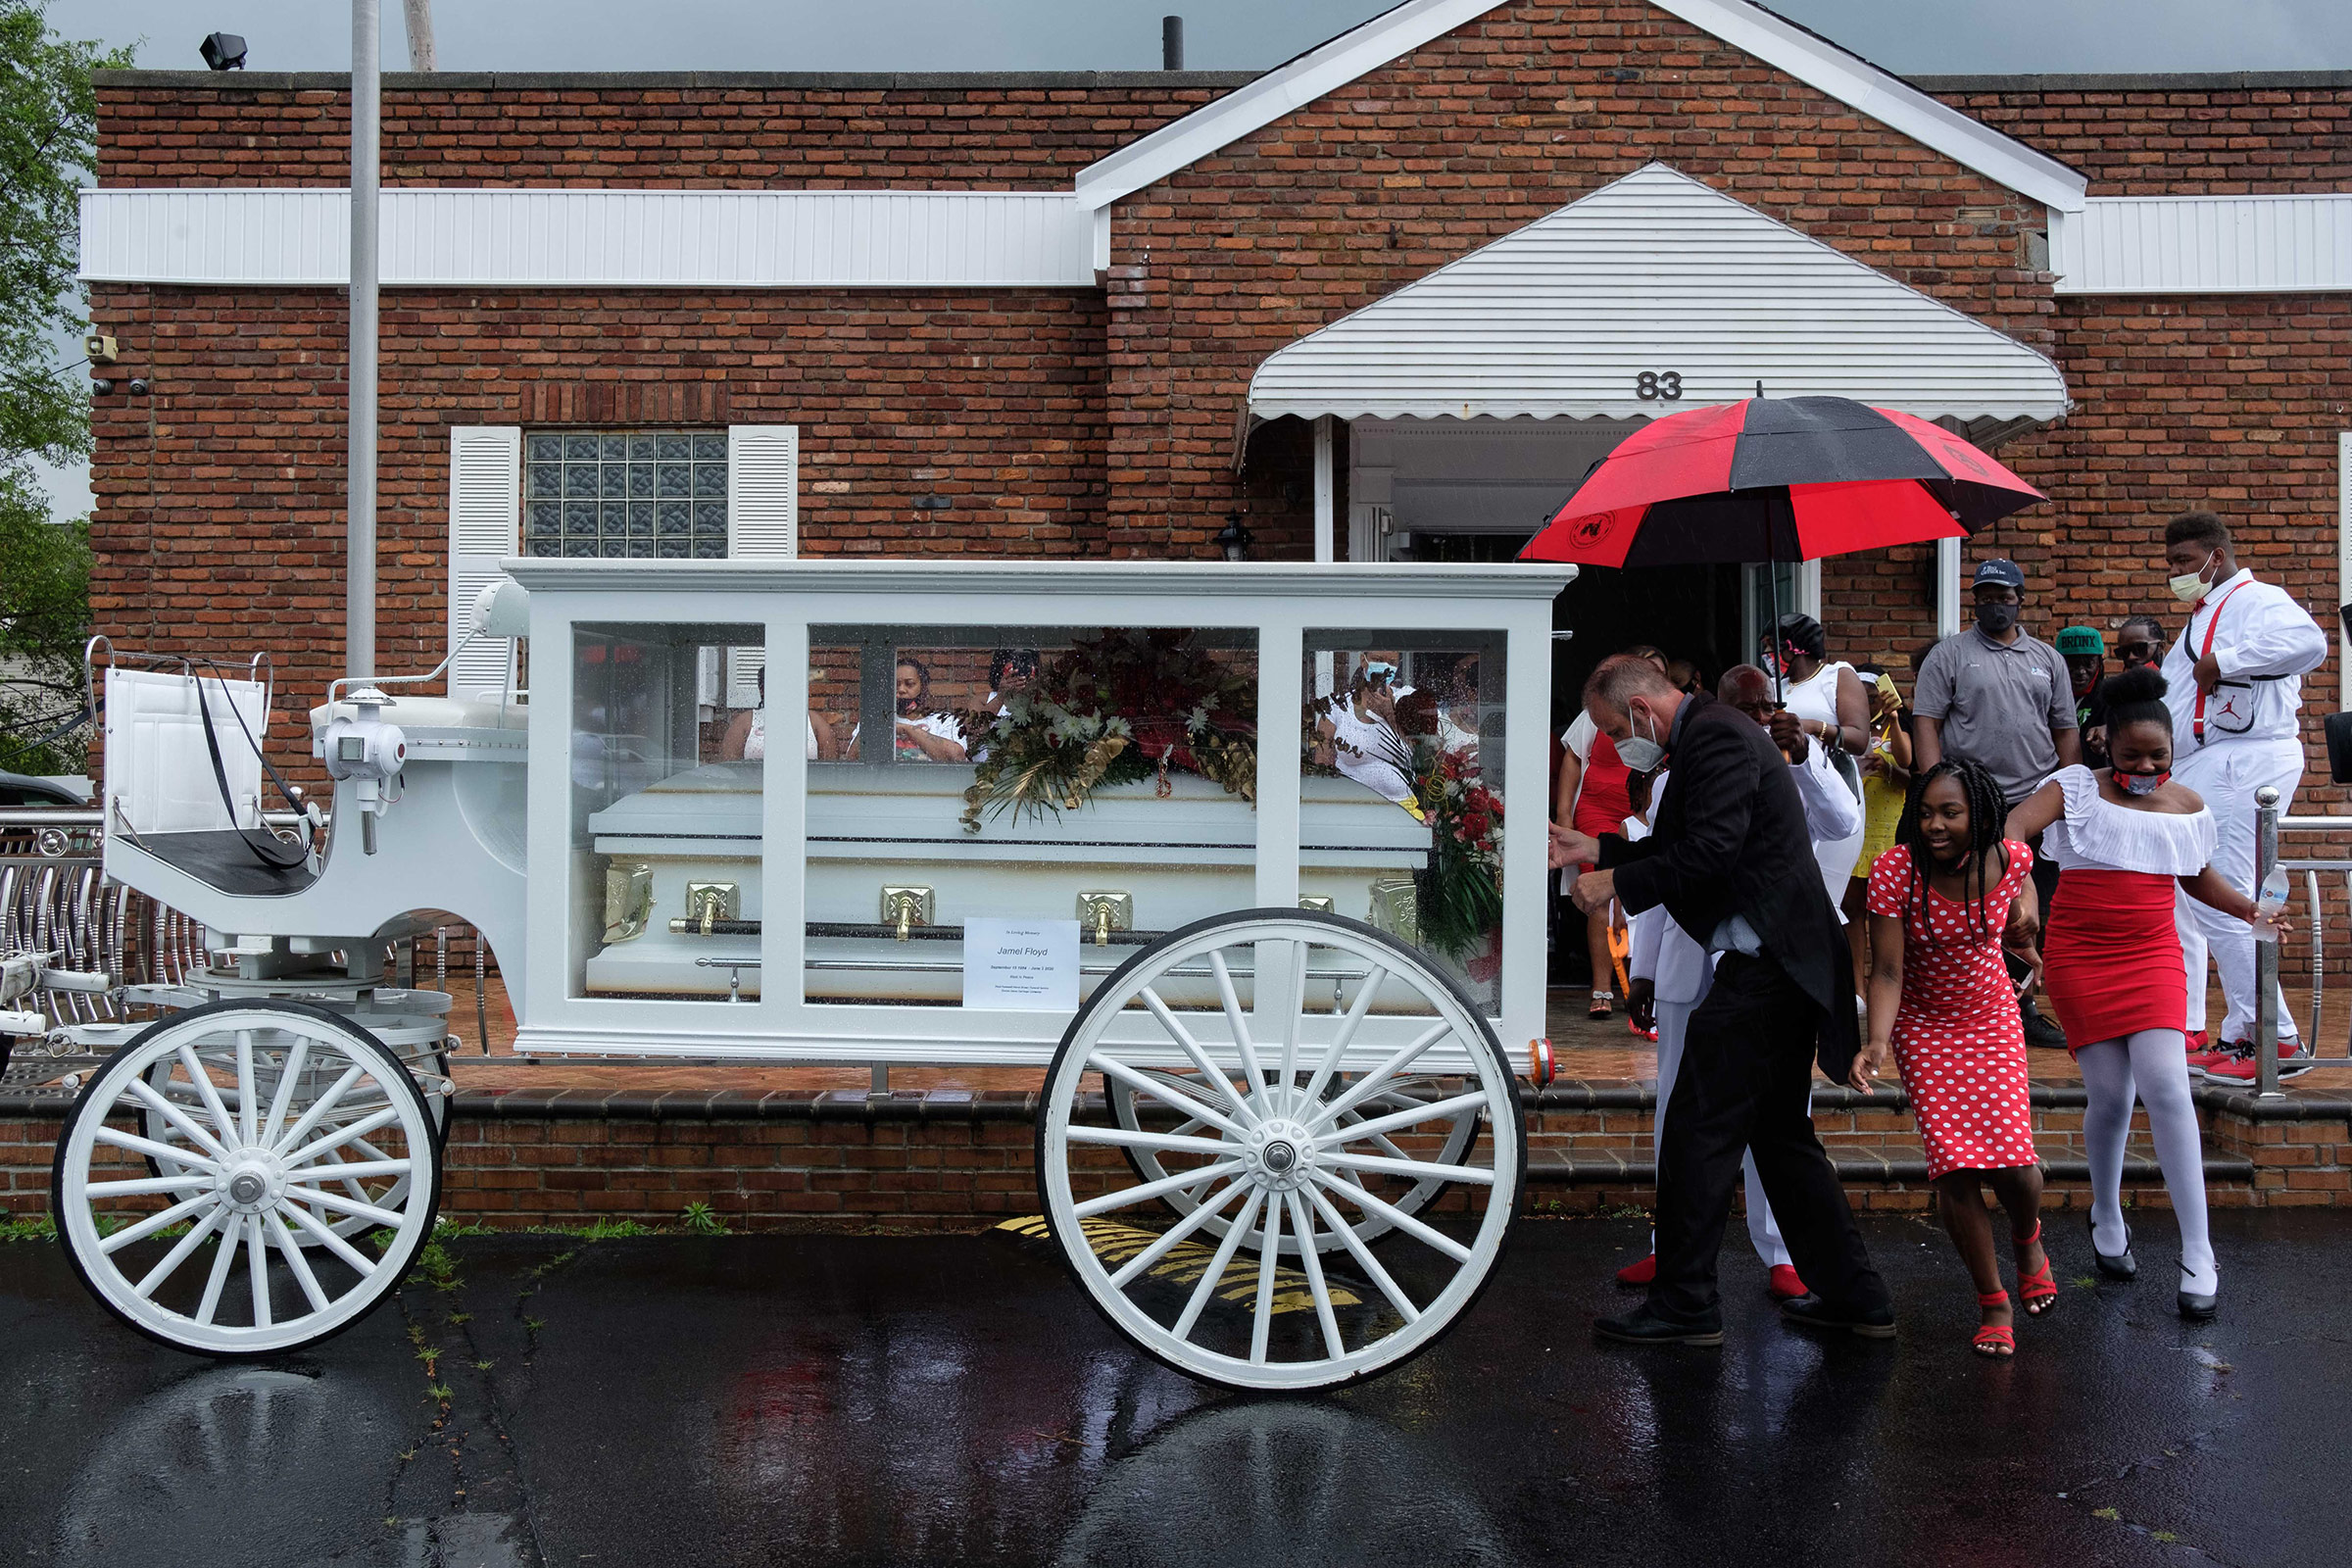 Jamel Floyd’s coffin is placed in a horse carriage after the funeral. (Yuki Iwamura)